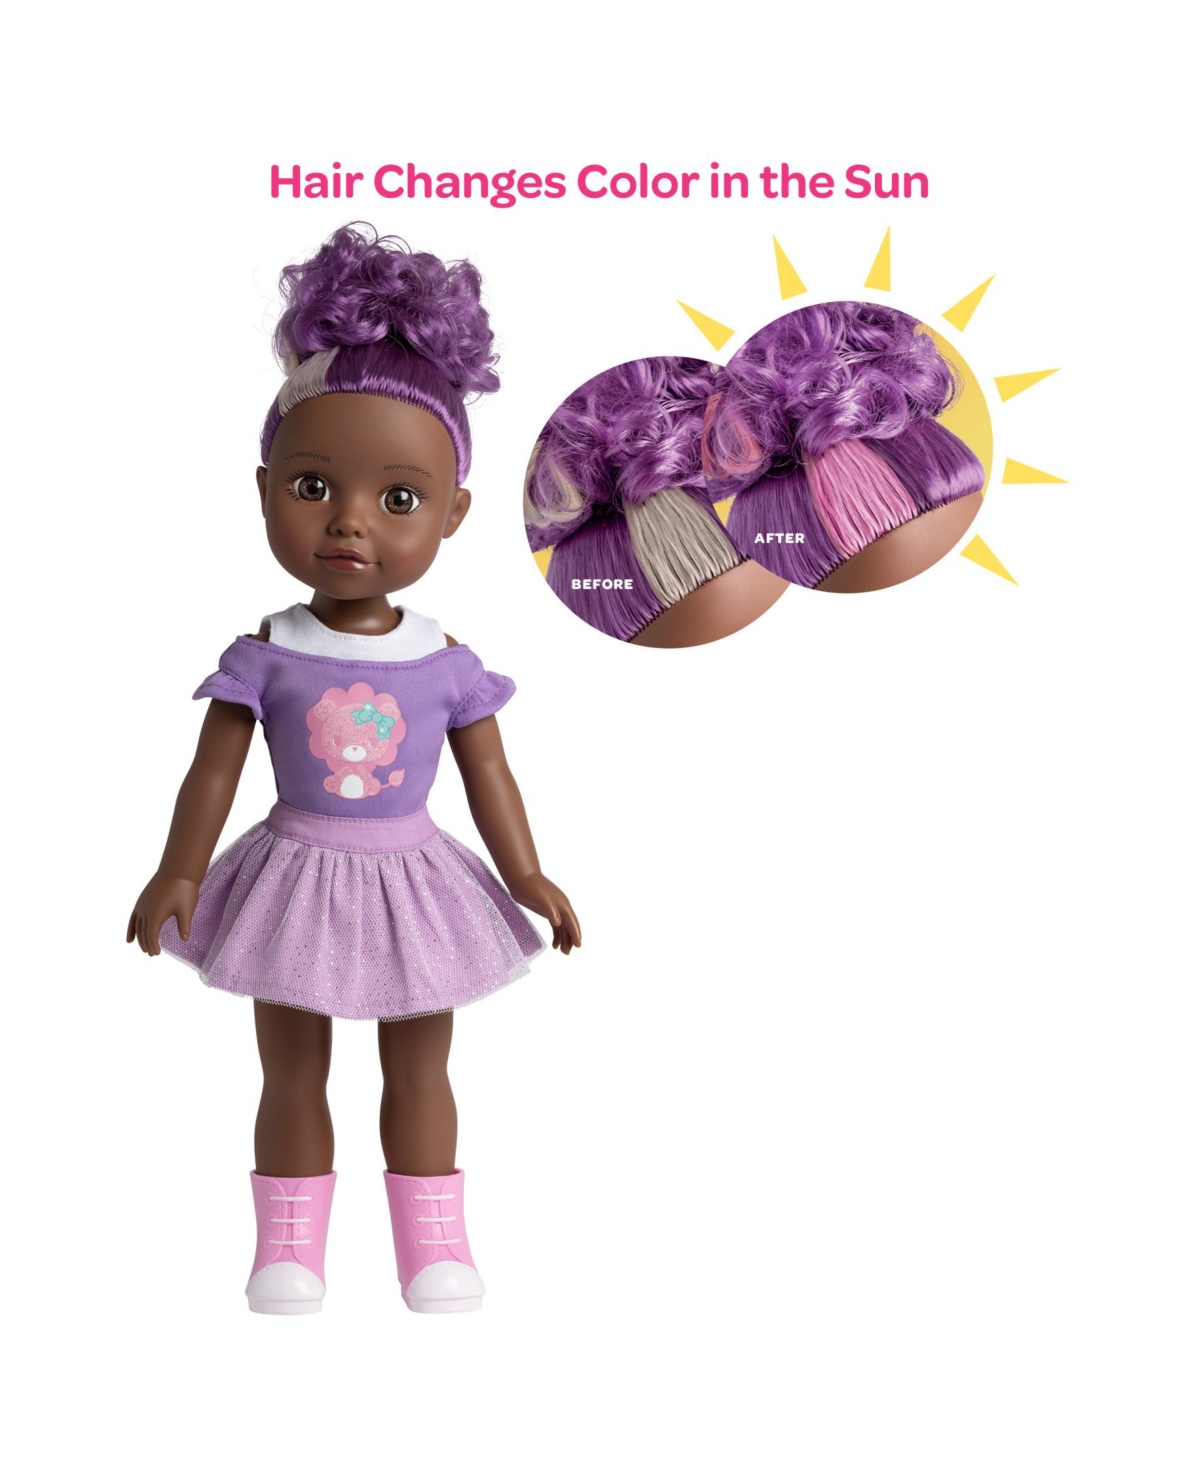 Adora Babies' Be Bright Doll In Multi